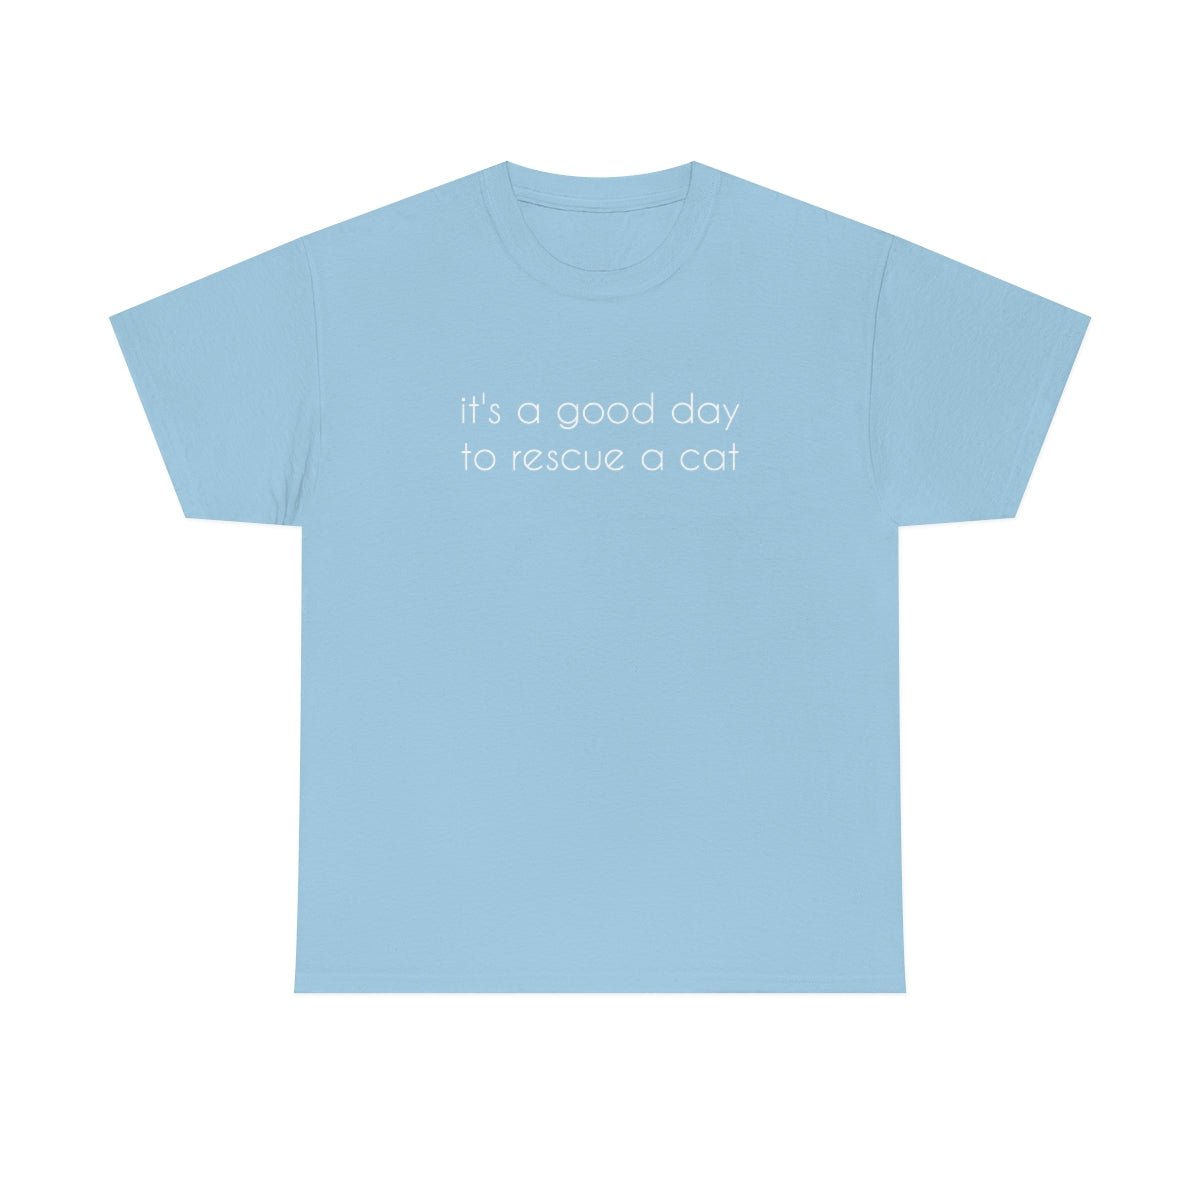 It's A Good Day To Rescue A Cat | Text Tees - Detezi Designs-39315726291224990192